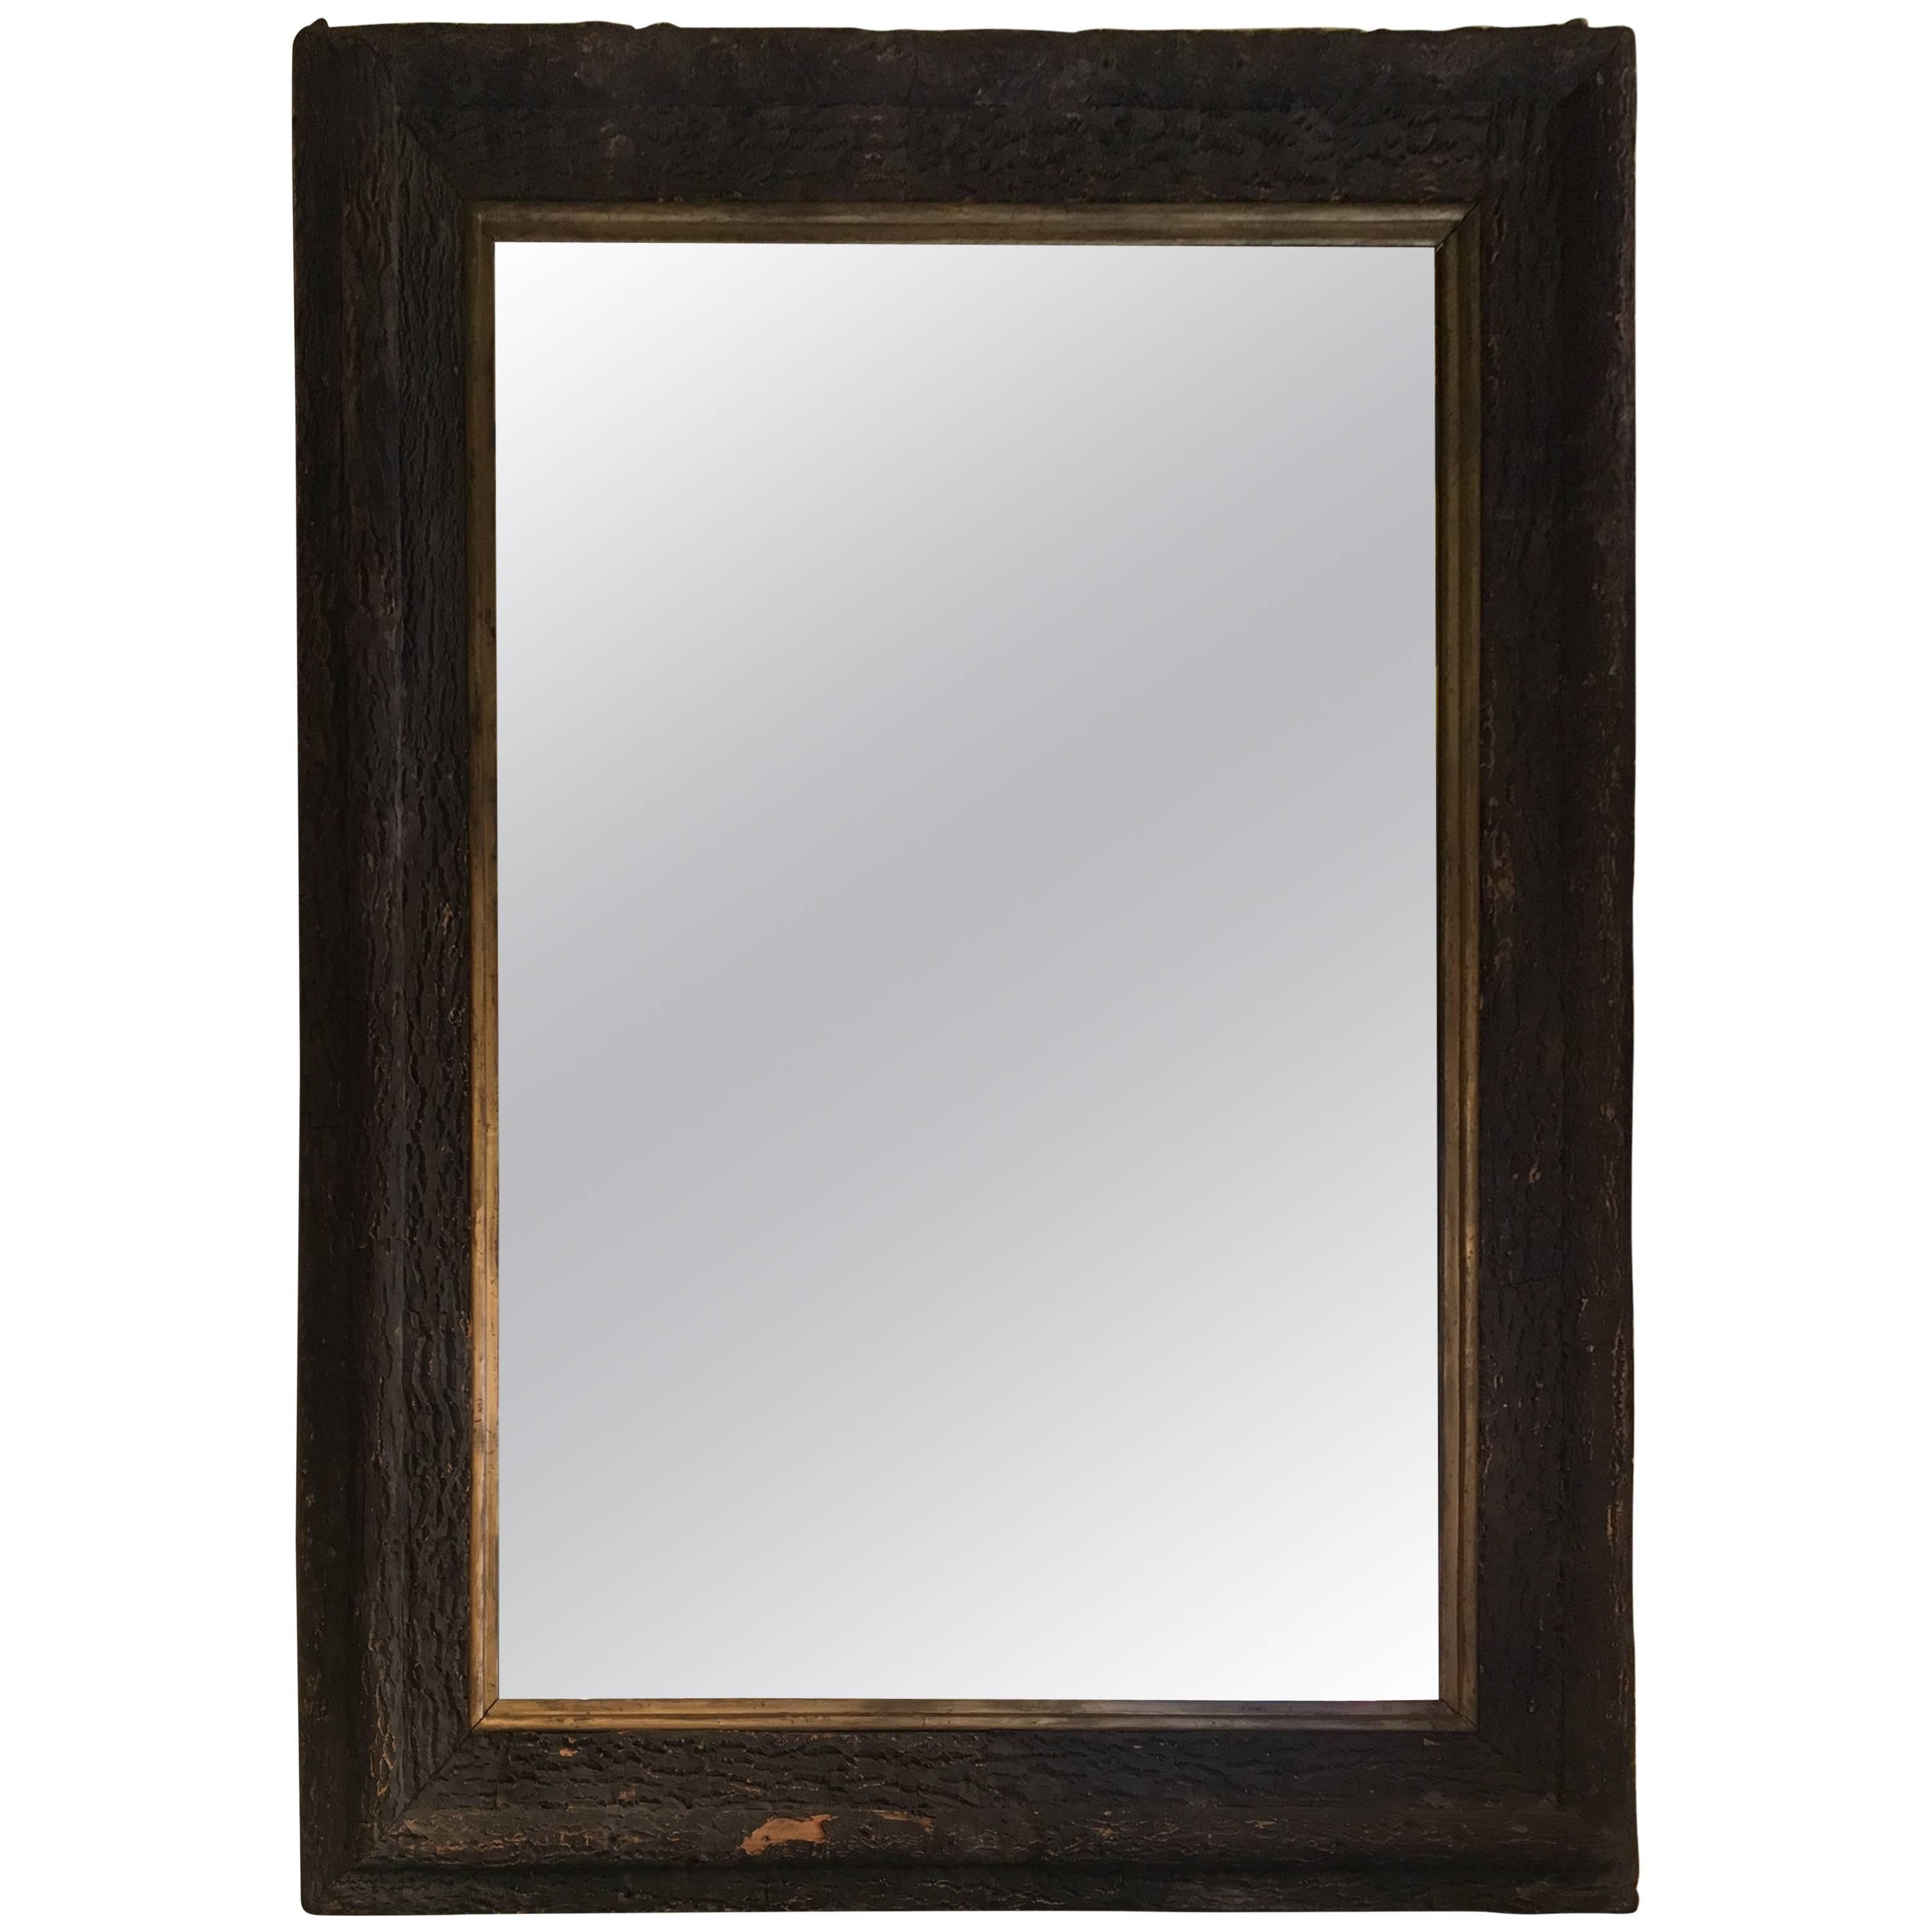 French Bark Cork Framed Mirror from 19th Century